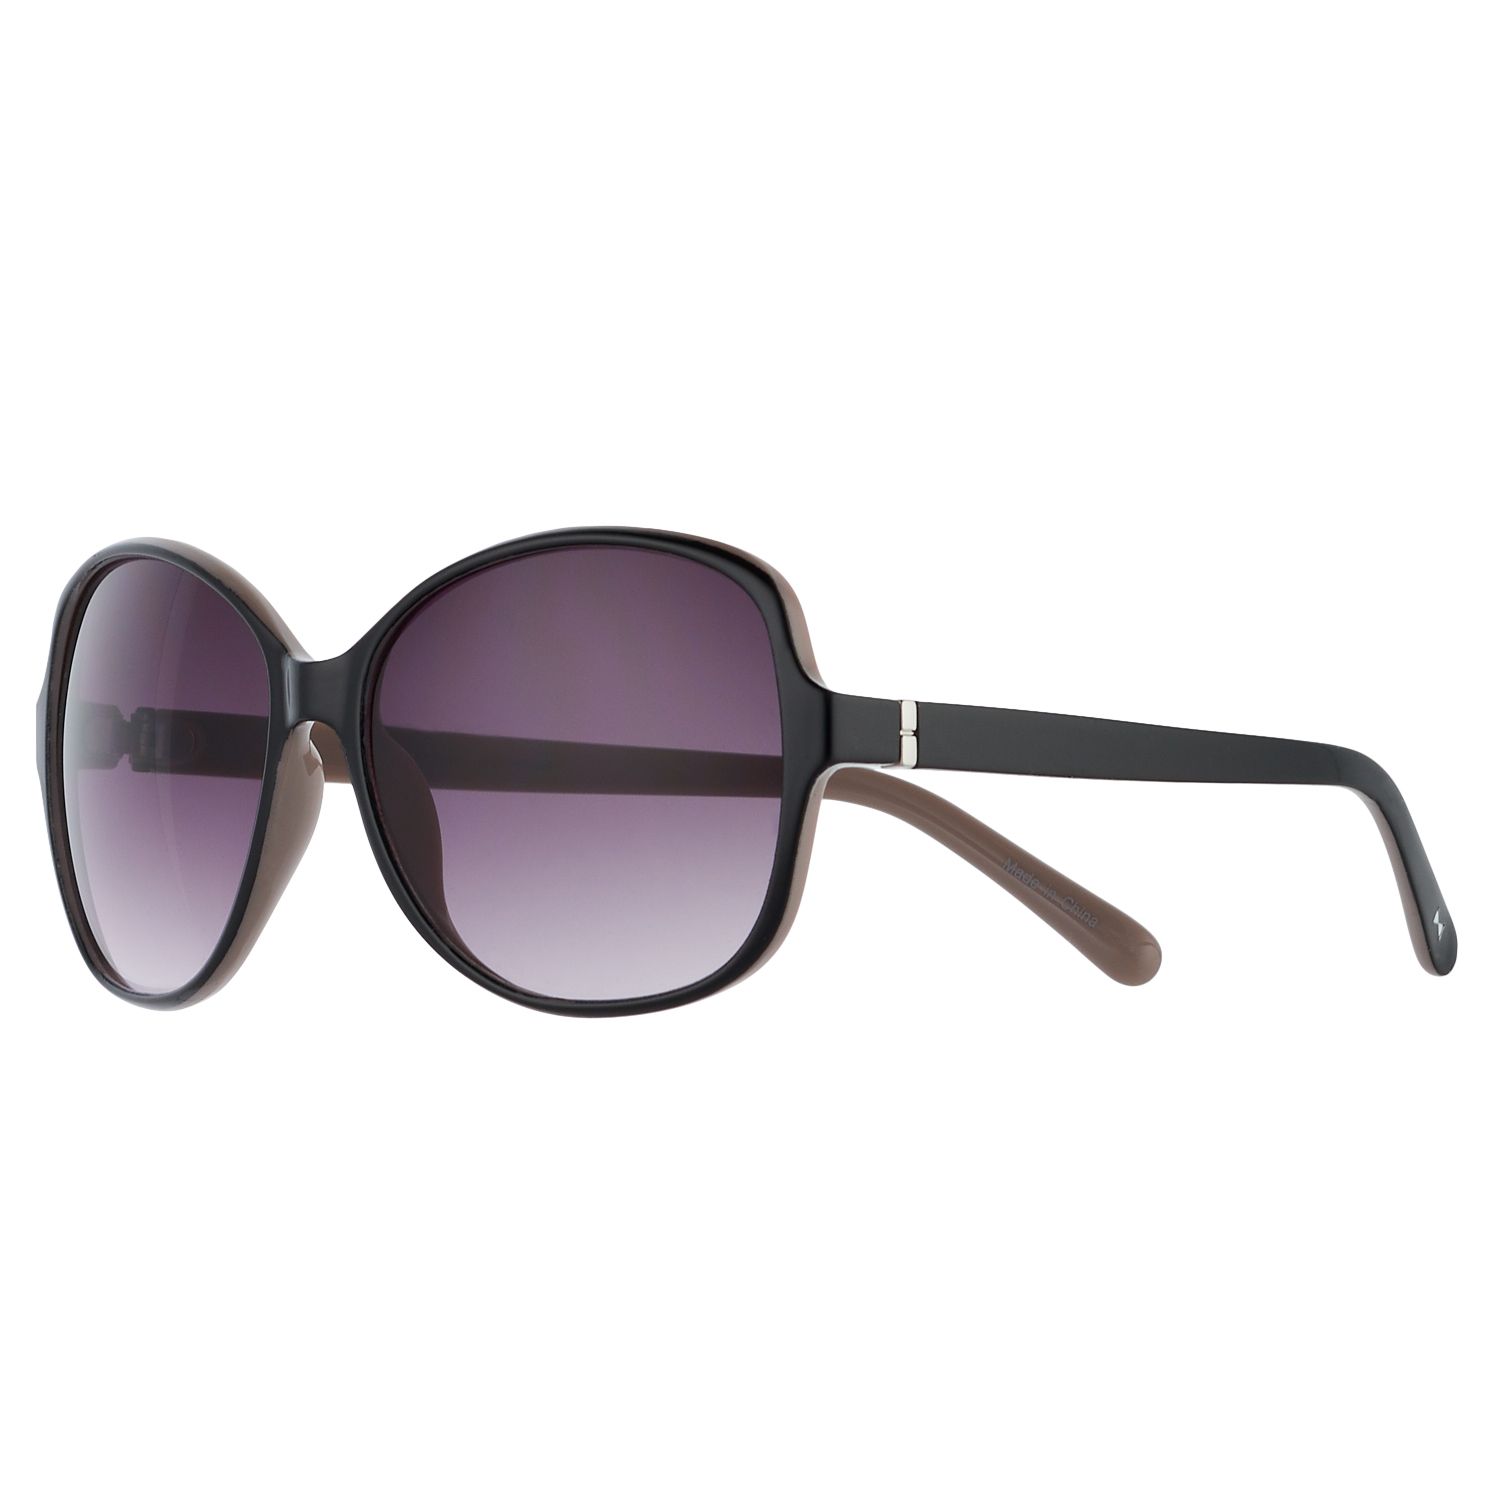 Image for LC Lauren Conrad Women's Bayside Large Square Sunglasses at Kohl's.